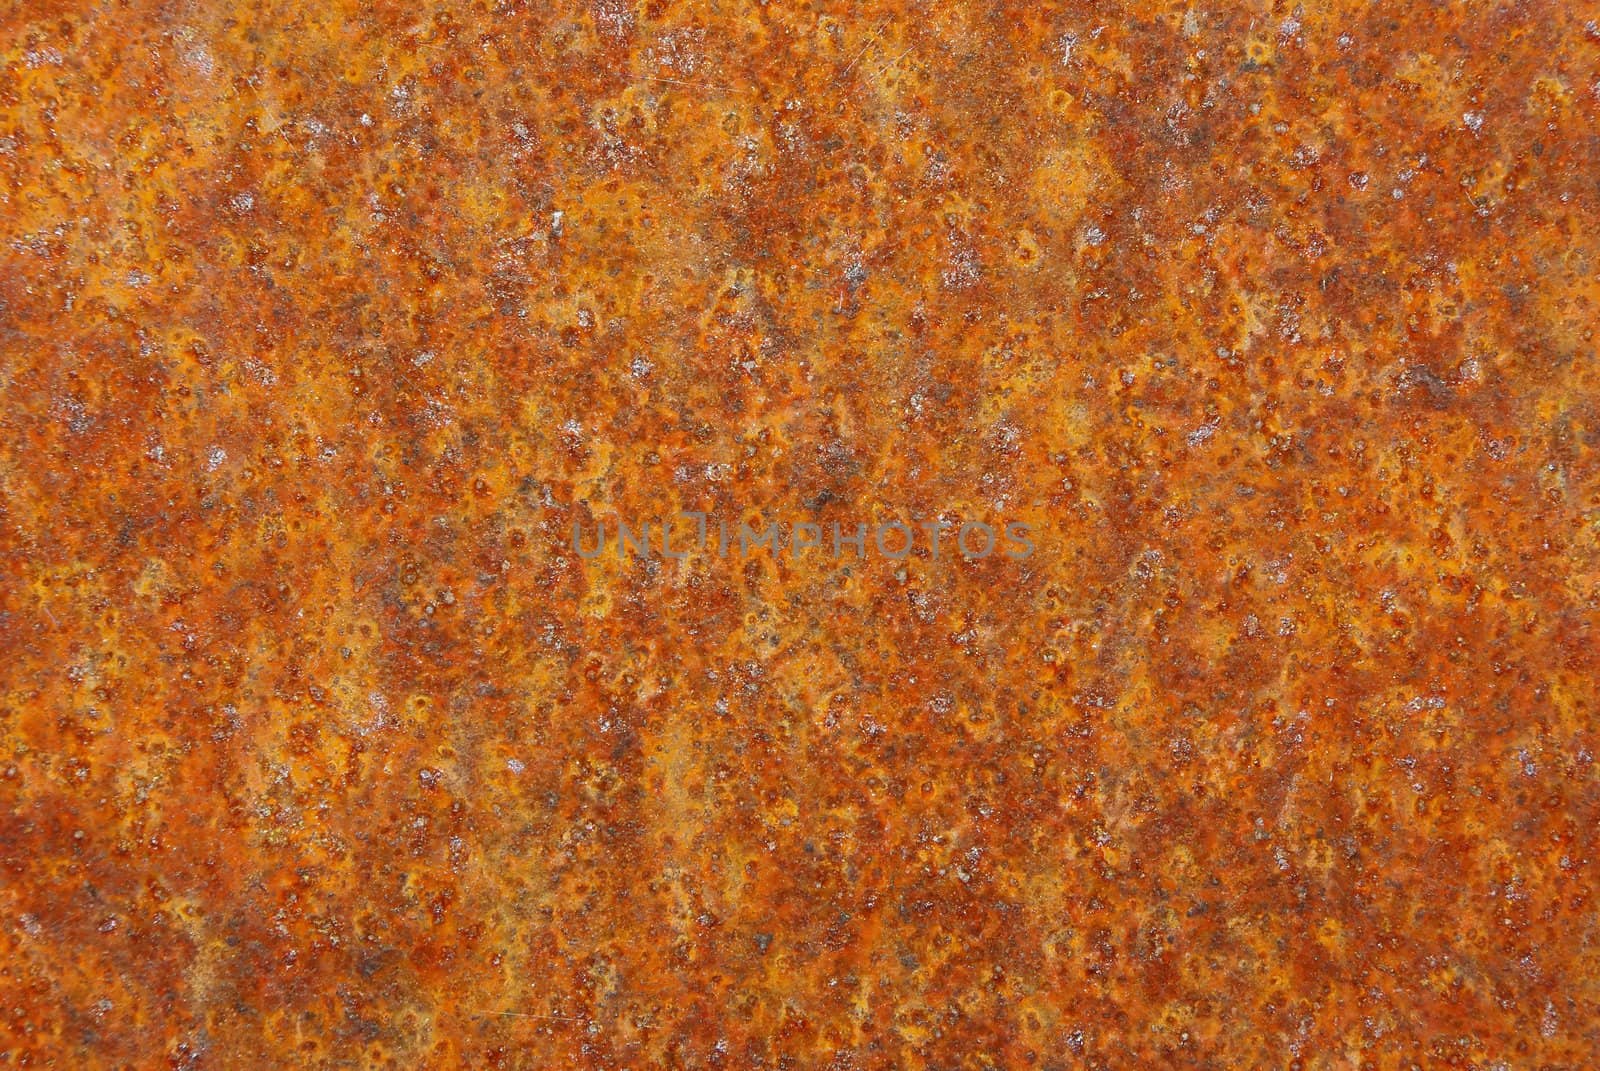 Rusty iron surface. May be used aas background or texture.